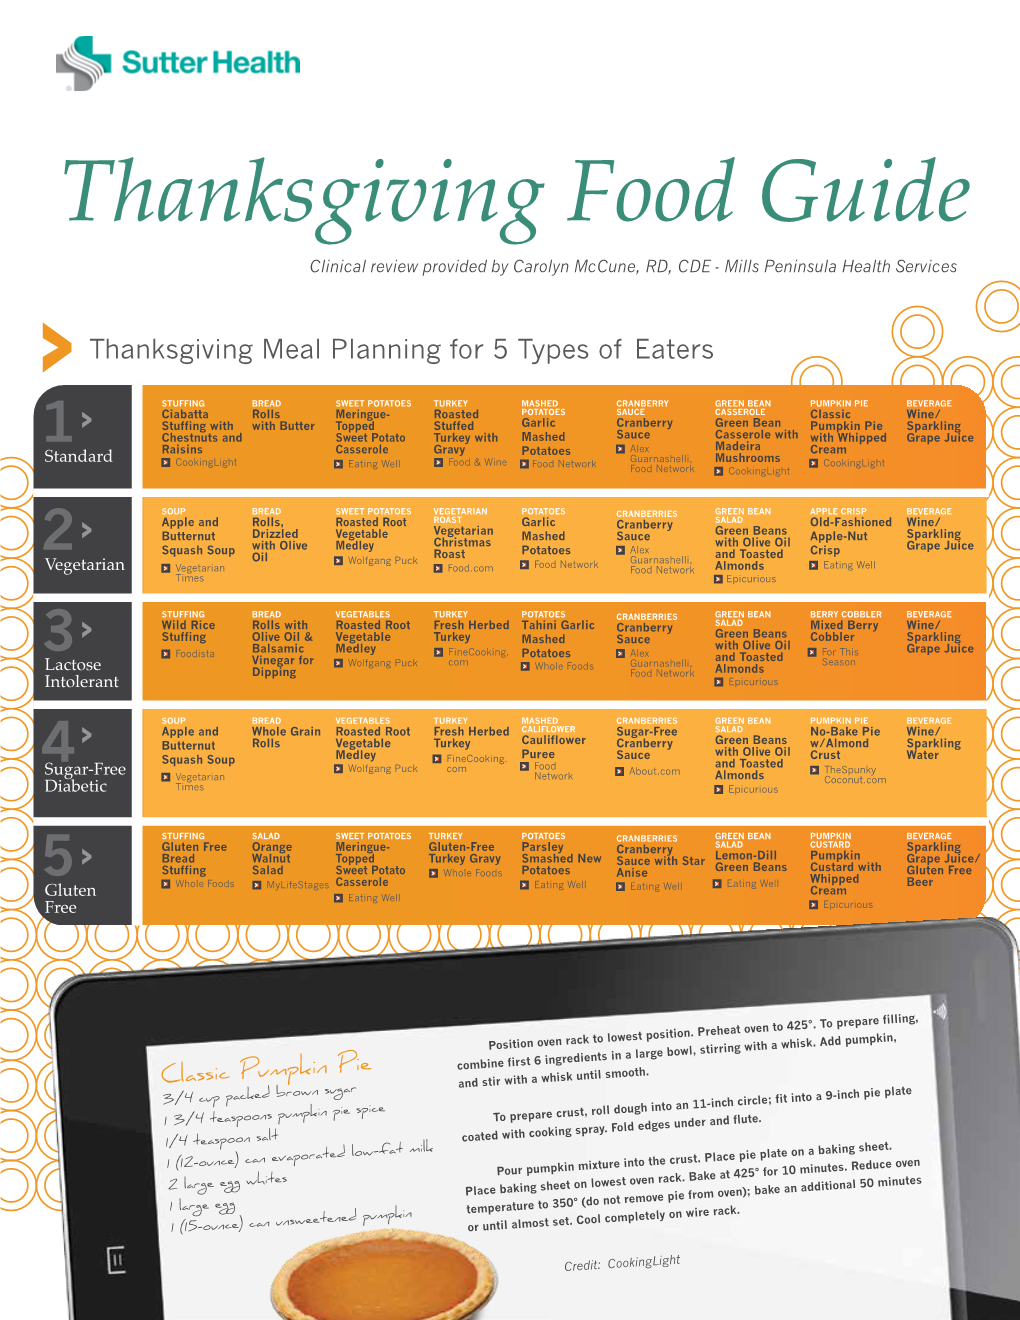 Thanksgiving Food Guide Clinical Review Provided by Carolyn Mccune, RD, CDE - Mills Peninsula Health Services